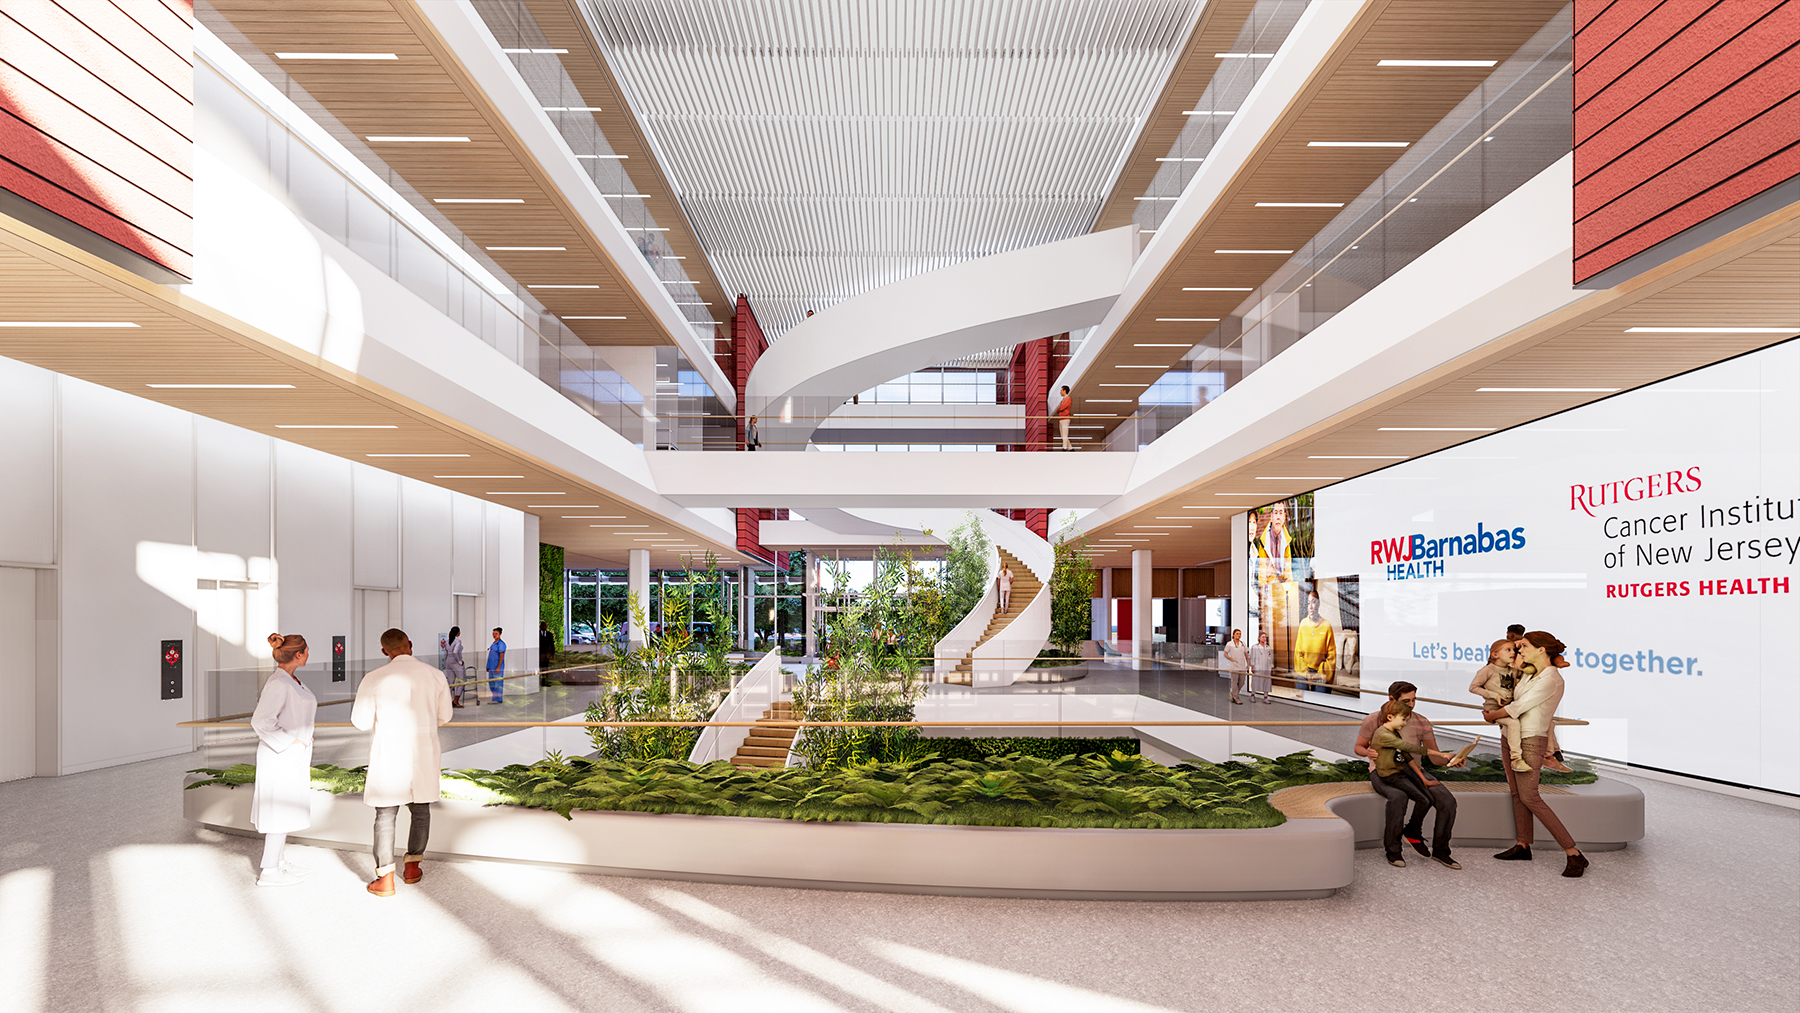 Interior pedestrian bridges will crisscross the large open atrium and laterally tie together the sides of the building. (Rendering courtesy of HOK)